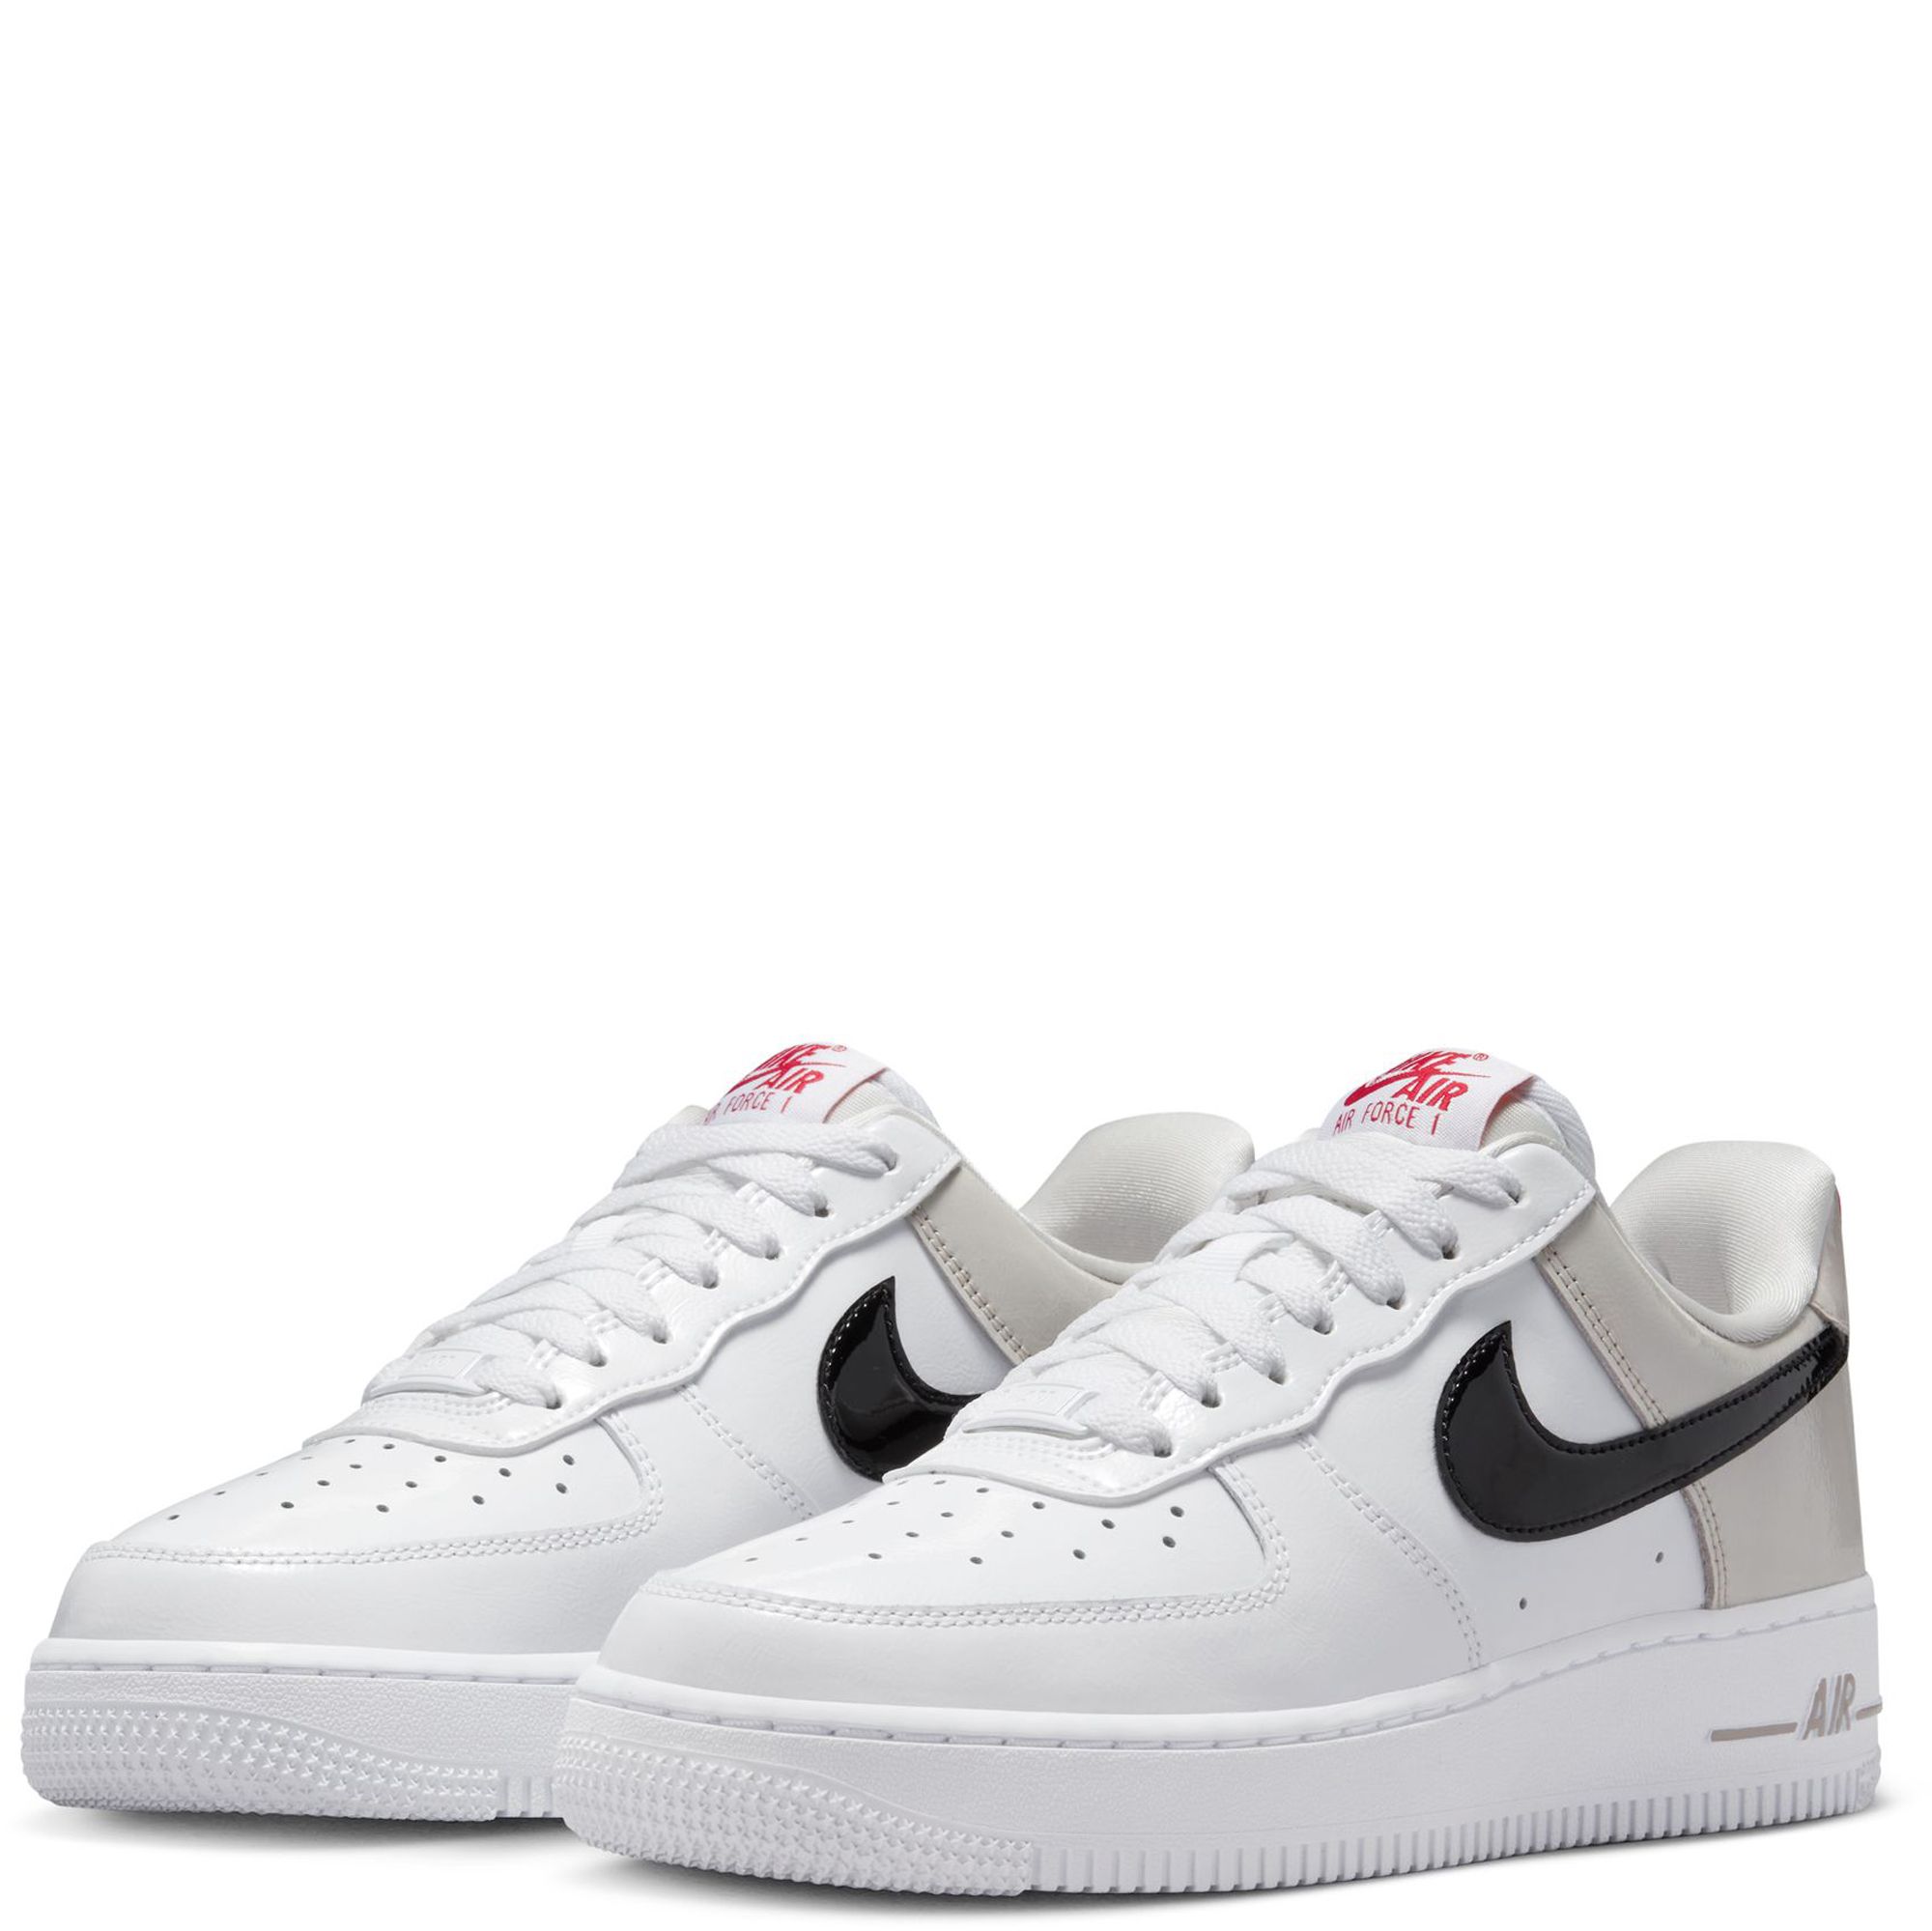 NIKE AIR FORCE 1 07 SNEAKERS SNEAKERS COLOR WHITE AND BLACK